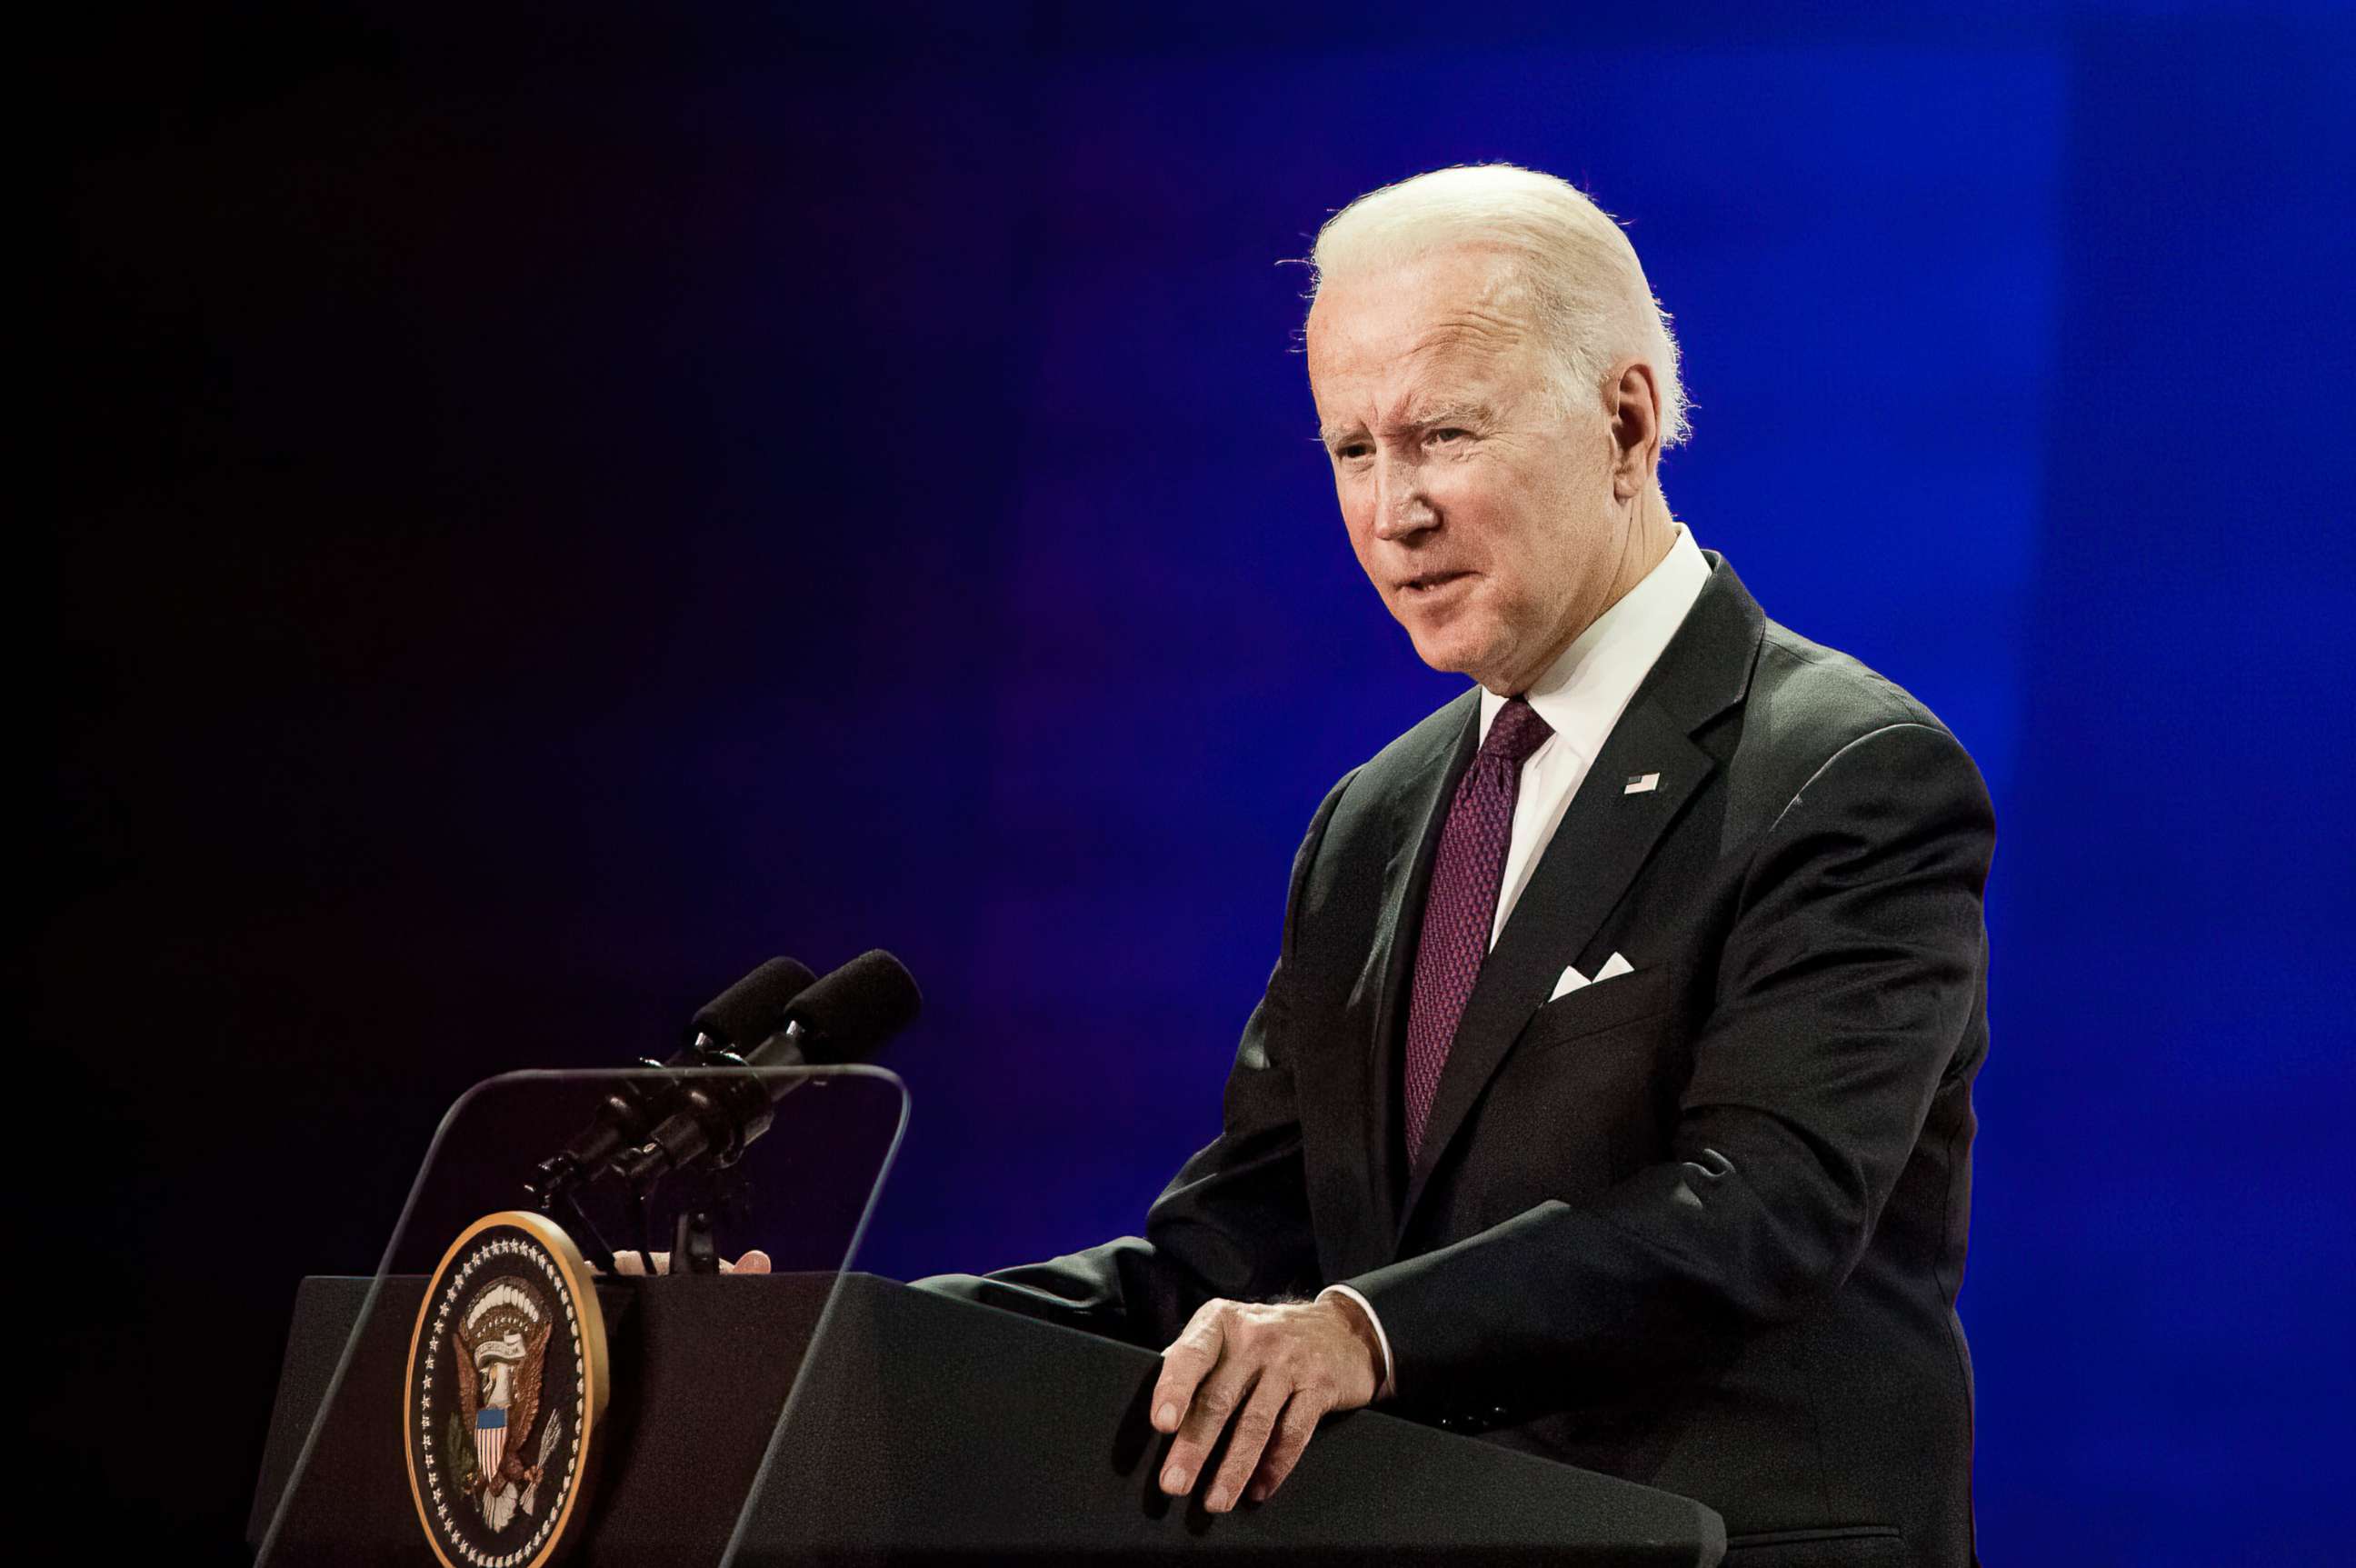 PHOTO: President Joe Biden speaks during a press conference in the G20 leaders' summit in Rome, Oct. 31, 2021.